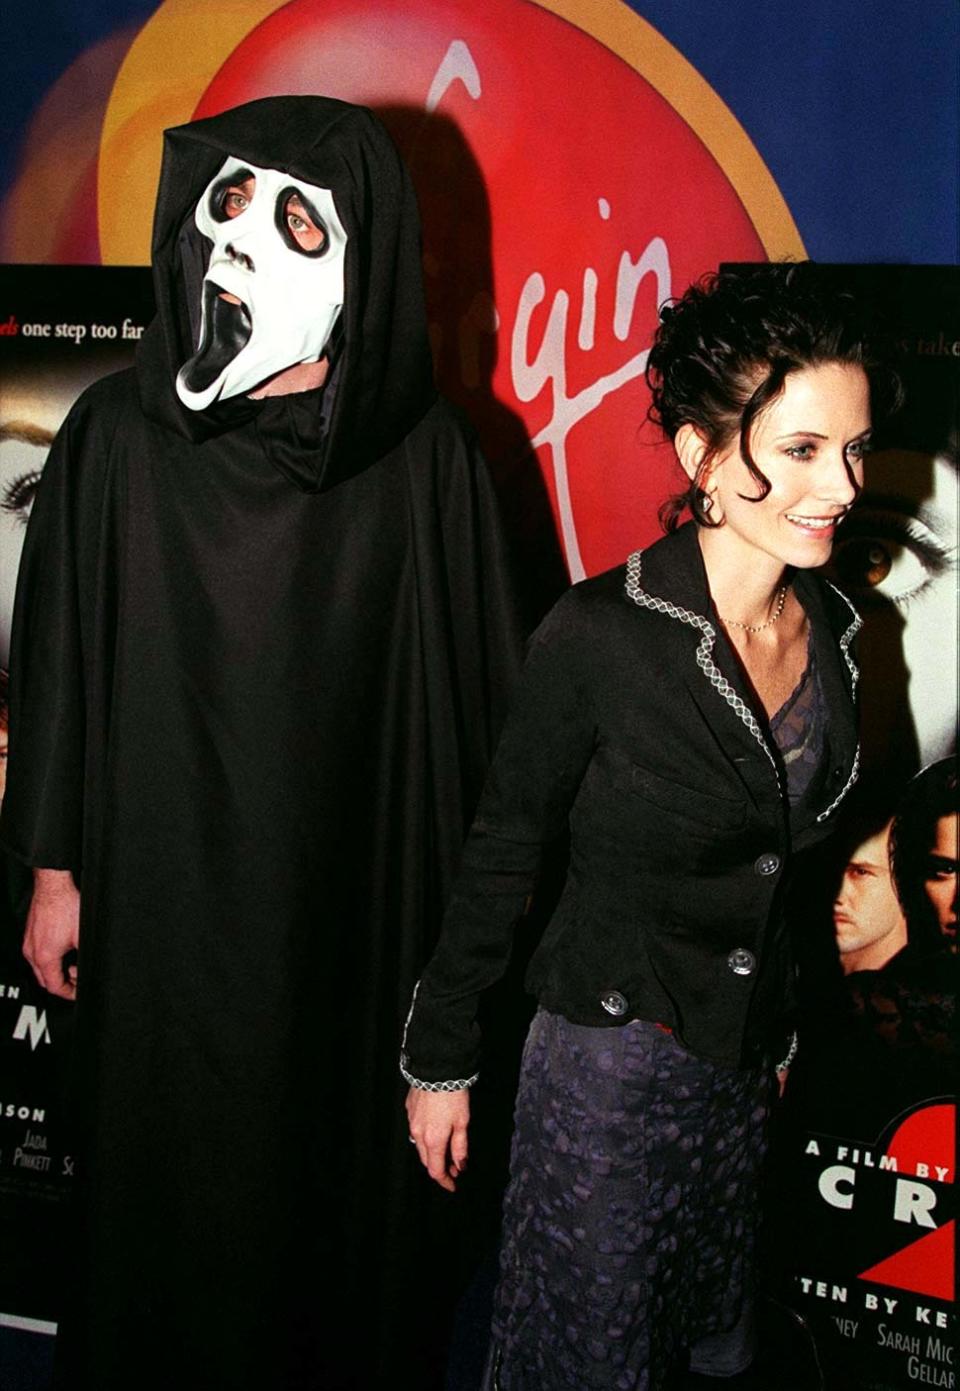 PA NEWS PHOTO 3/4/98 FRIENDS STAR, AMERICAN ACTRESS, Courteney Cox ATTENDS THE PREMIERE OF HER NEW FILM, "SCREAM 2" AT THE VIRGIN CINEMA, FULHAM ROAD, LONDON